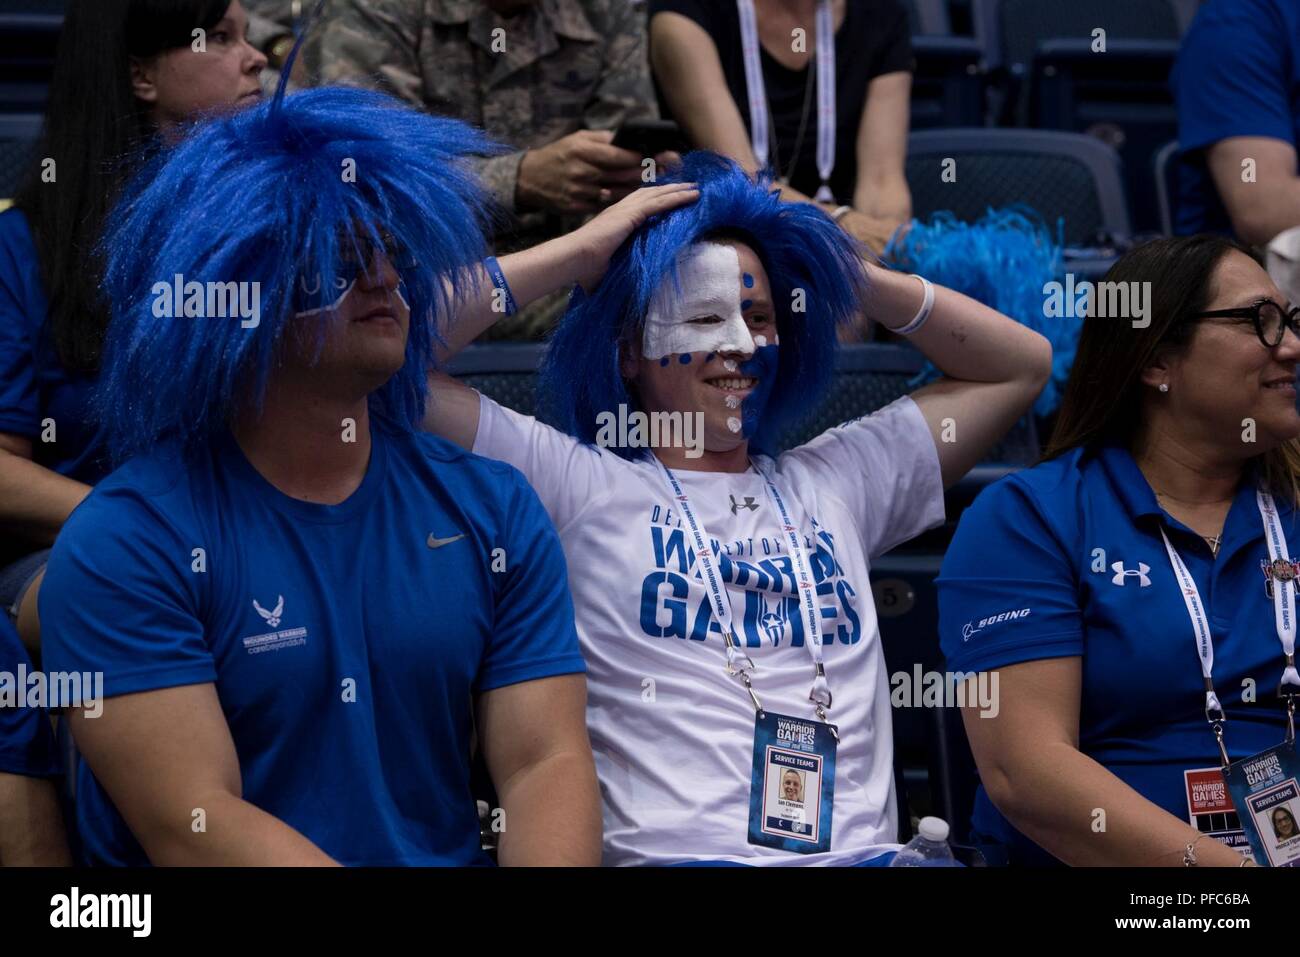 Team Air Force fans cheer on Team Air Force during the DoD Warrior Games sitting volleyball finals, June 8, 2018, at the U.S. Air Force Academy in Colorado Springs, Colorado. The Warrior Games are an annual event, established in 2010, to introduce wounded, ill and injured service members to adaptive sports as a way to enhance their recovery and rehabilitation. Stock Photo